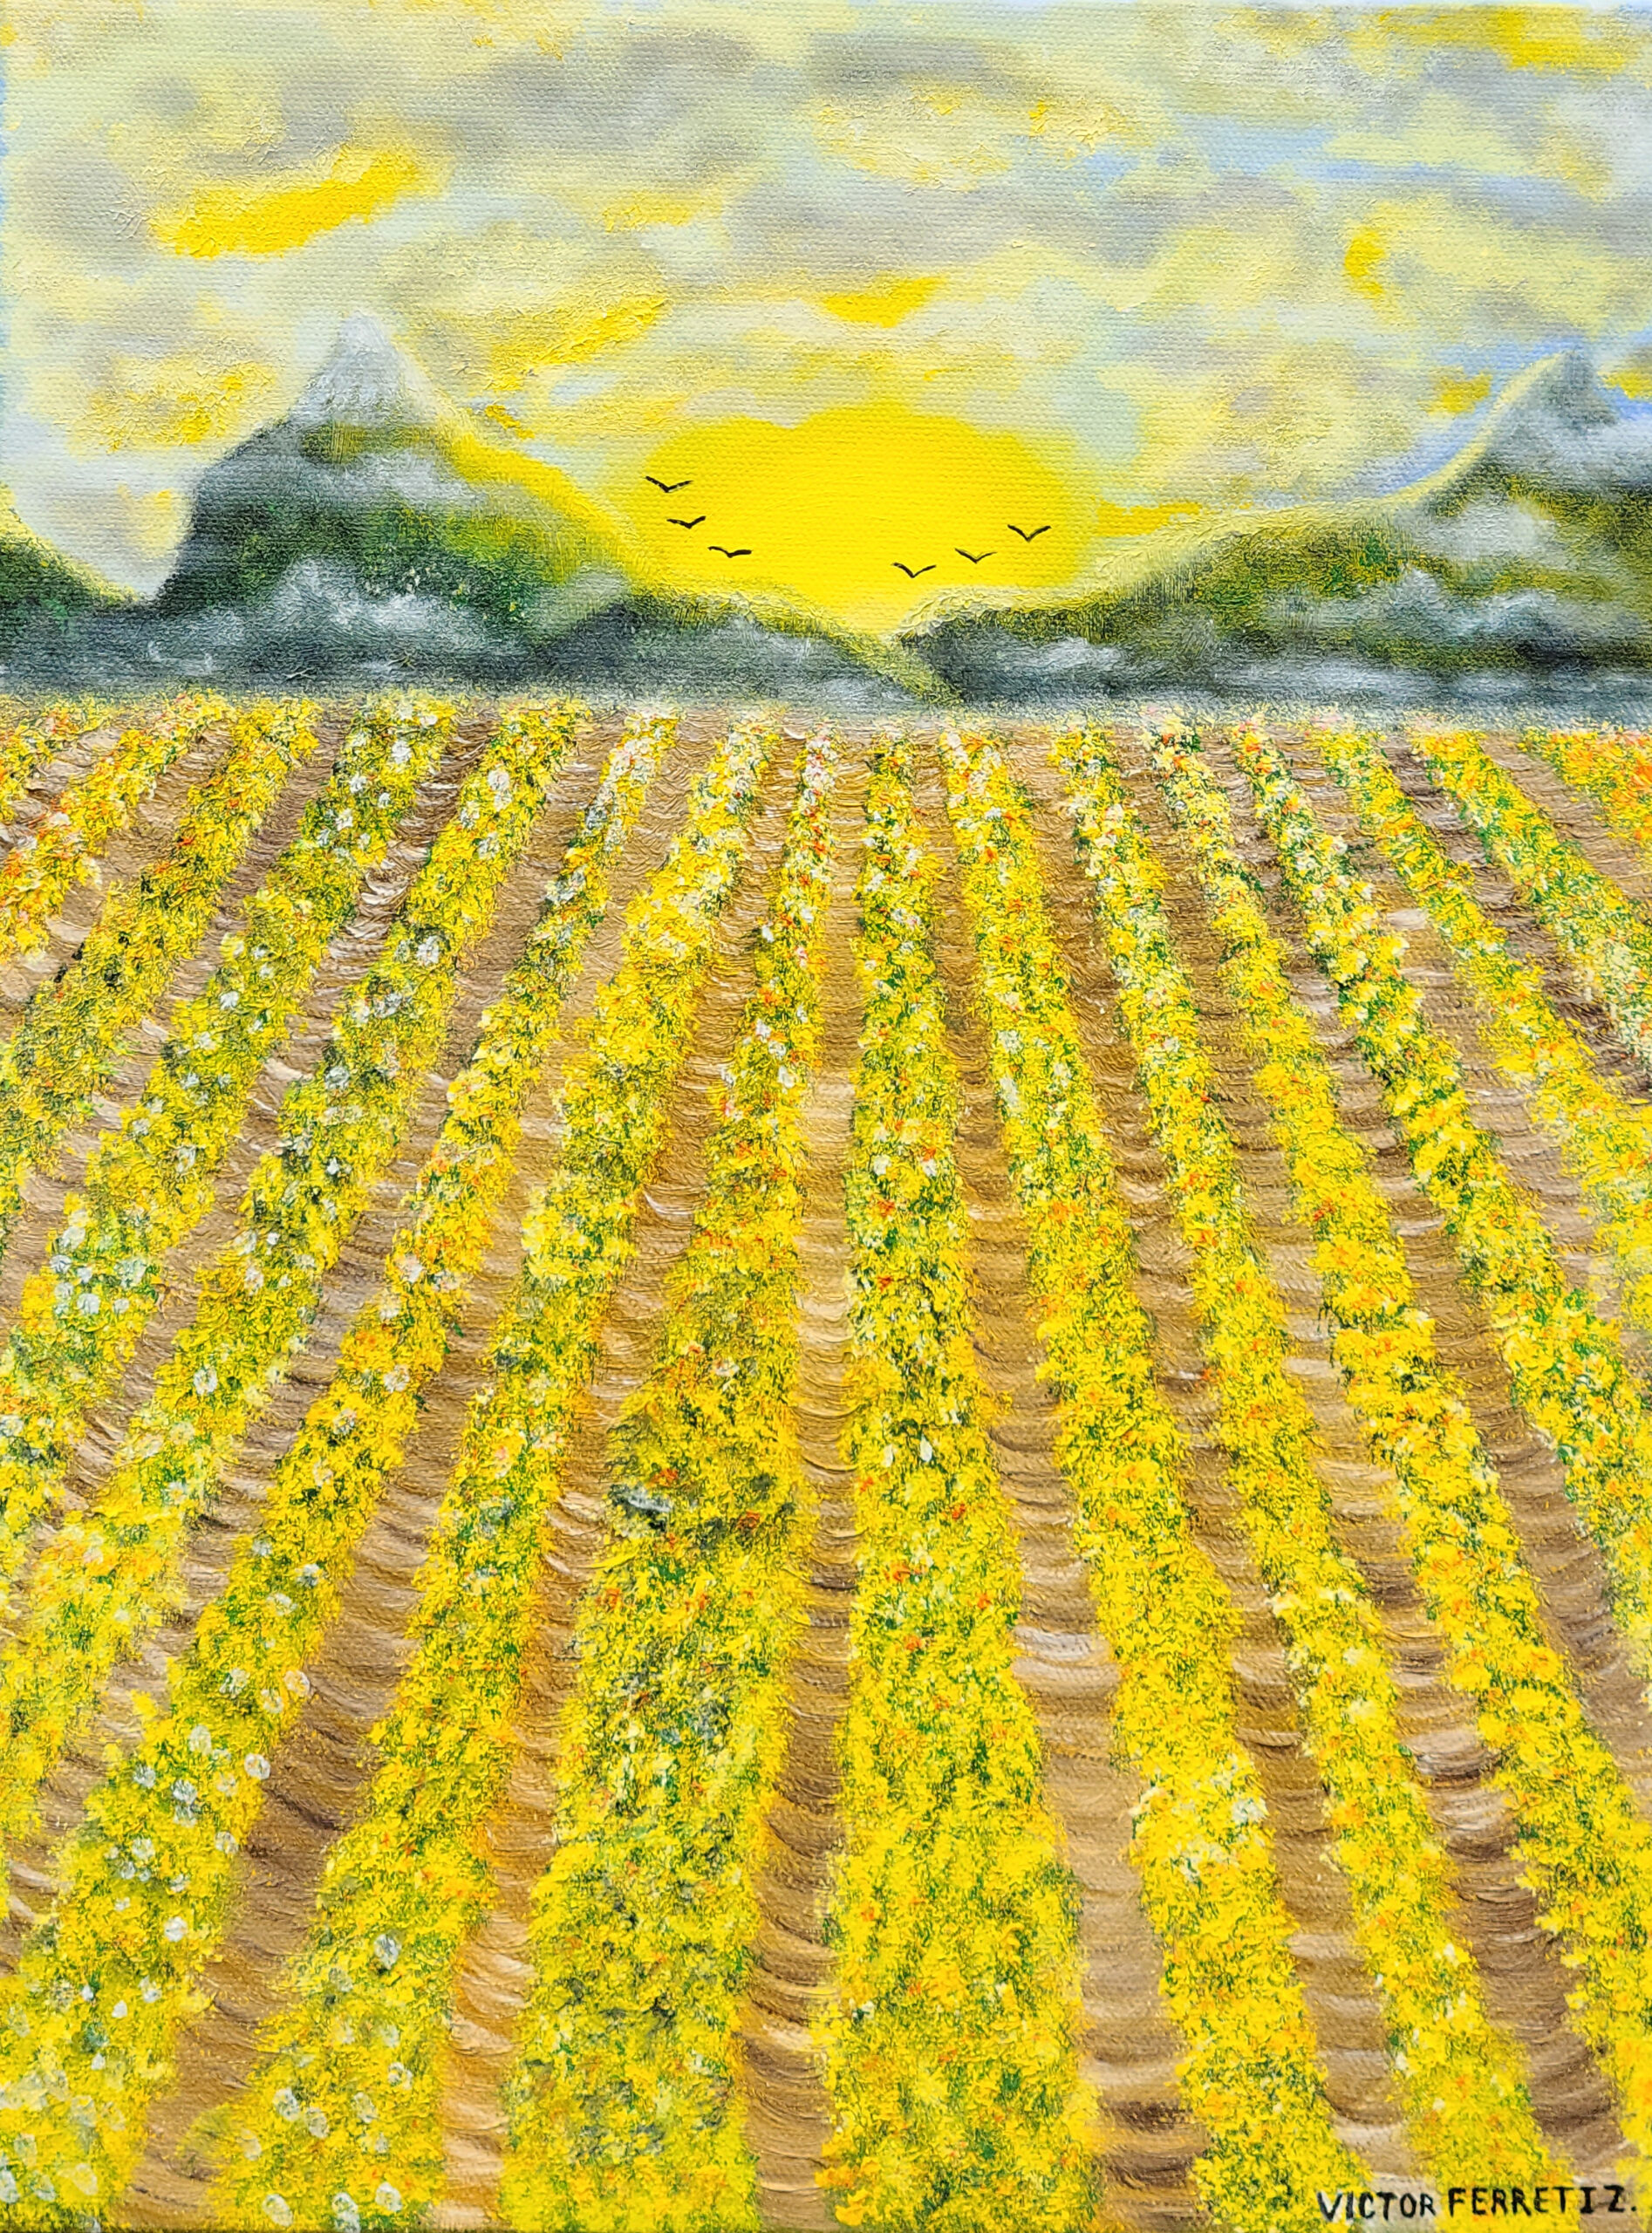 This original work represents our vision of beyond our future, our expectations of how we want to see ourselves in a few years. The radiance of the sun is a sign that the best is yet to come. The grooves of yellow flowers signify happiness and the great harvest we are getting from all our effort. The mountains are the barriers that we must jump in order to get to what we want to be.